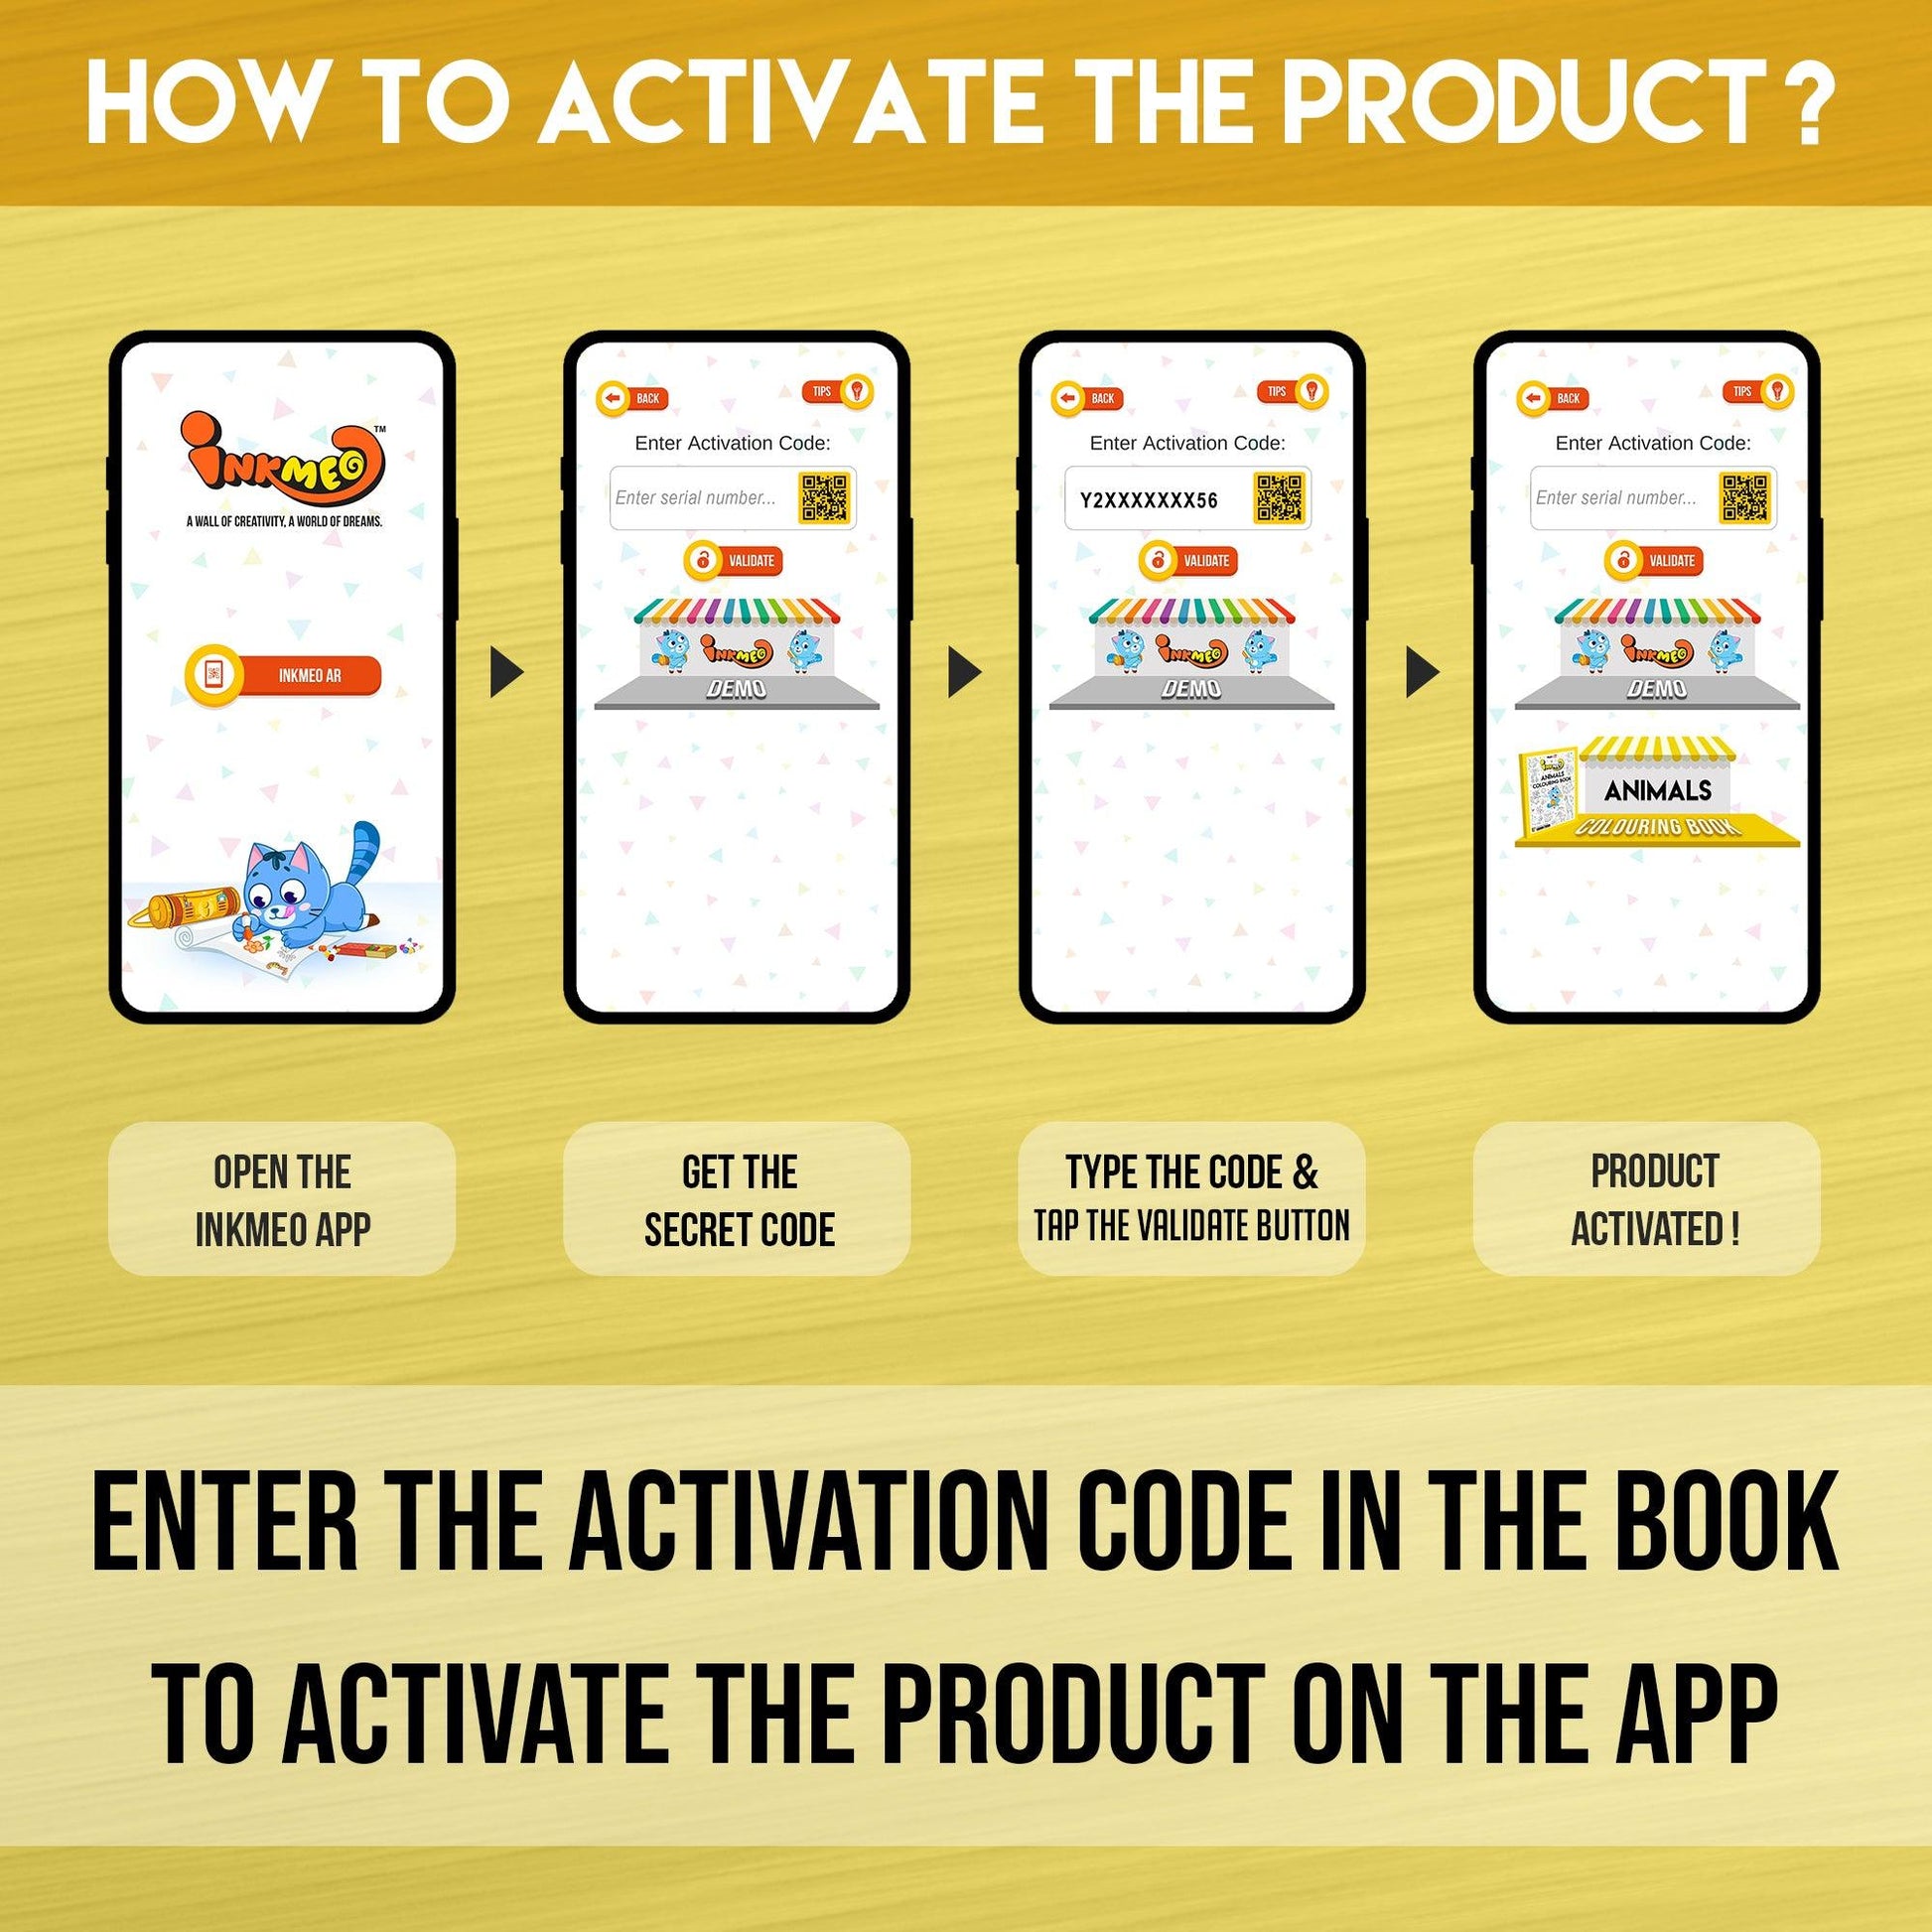 The image displays a yellow background with four phones showcasing the message "To access the Inkmeo app, acquire the secret code, input the code, and tap for validation to activate the product.